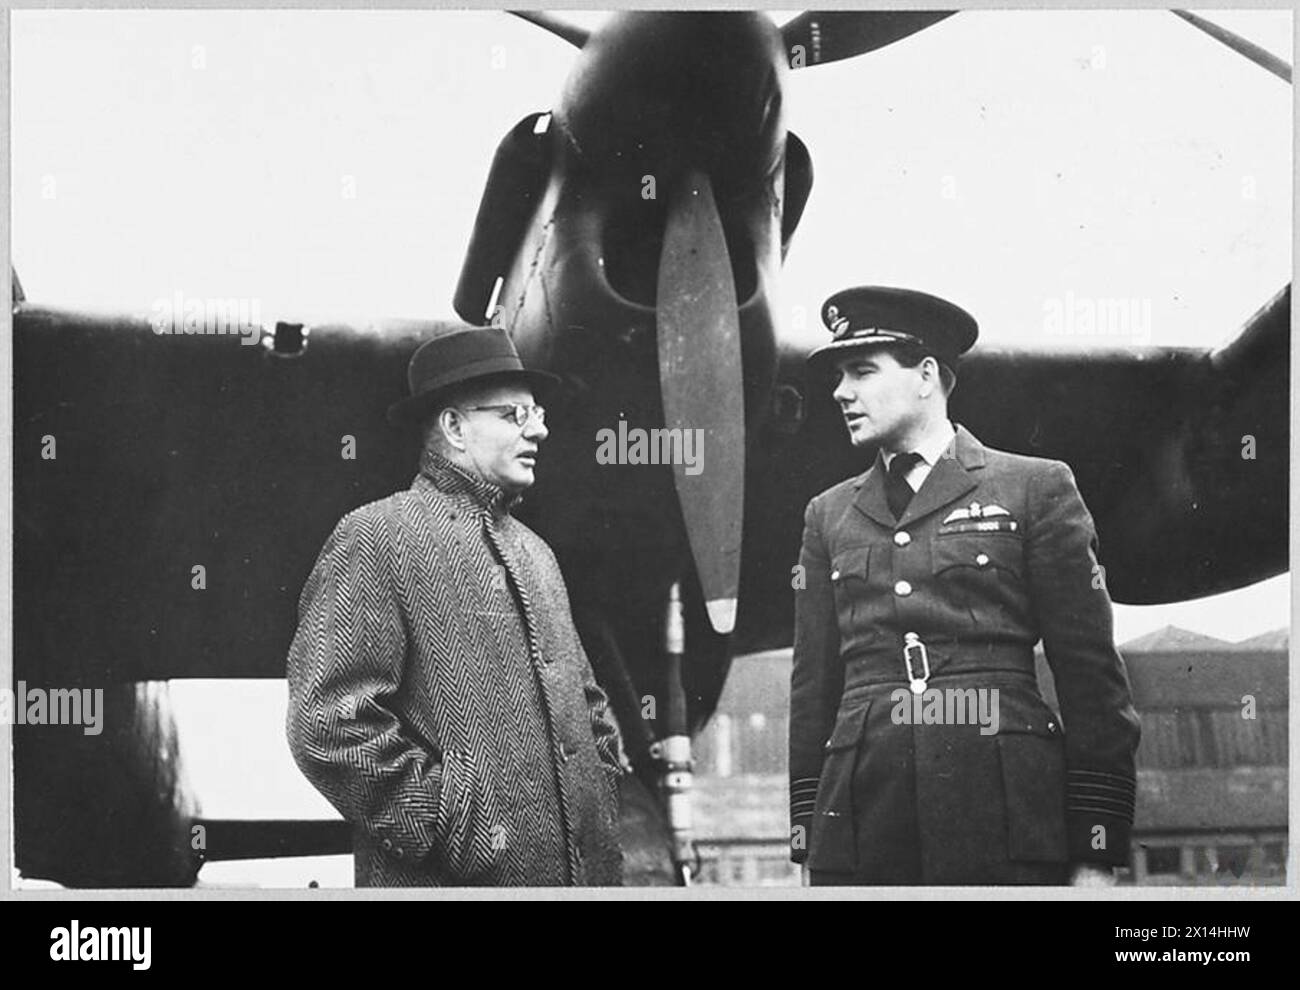 VETERAN LANCASTER BOMER 'G' FOR GEORGE PRESENTEDTO AUSTRALIAN PREMIER. - 13246. Picture (issued June 1944) shows - Australian Premier, Mr. John Curtin, is talking to Group Captain H.I. Edwards, VC.,DSO.,DFC., of Perth Australia, the Station Commander Royal Air Force Stock Photo